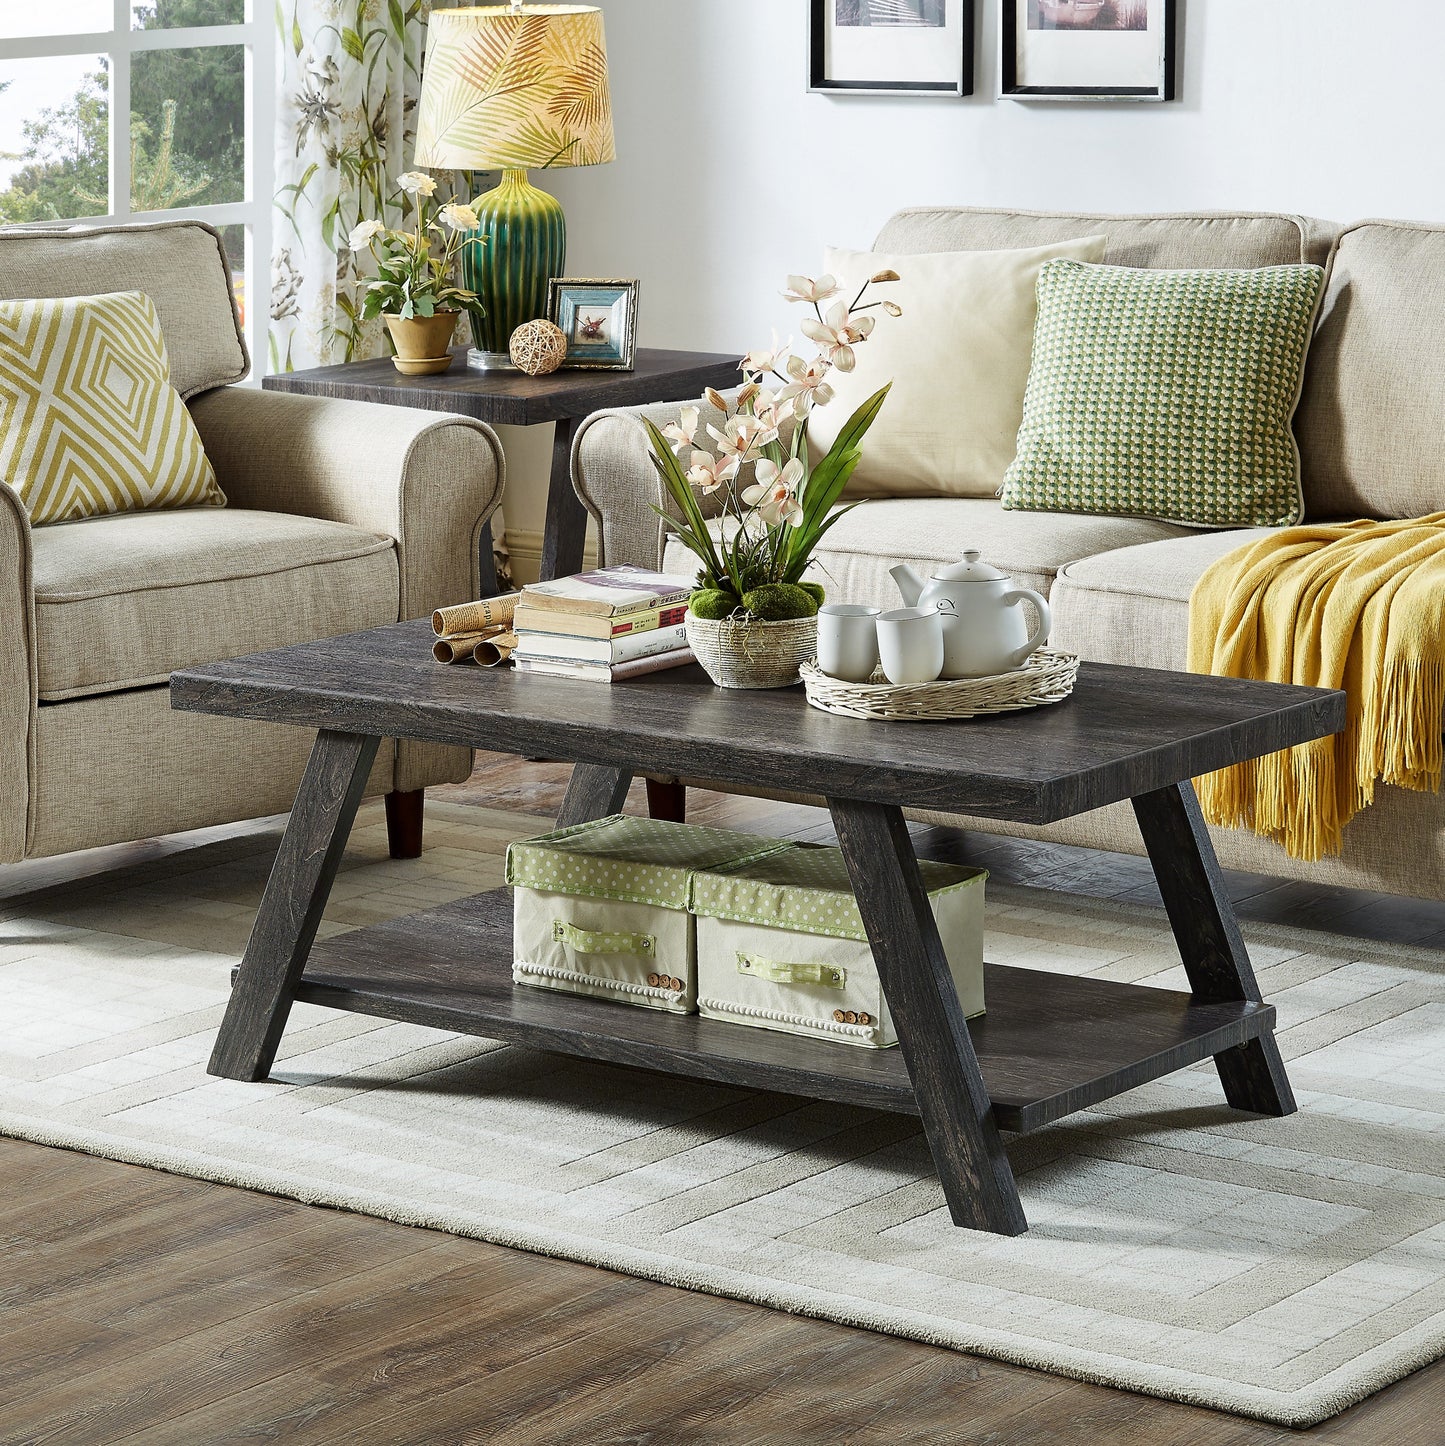 Athens Contemporary Replicated Wood Shelf Coffee Set Table in Charcoal Finish